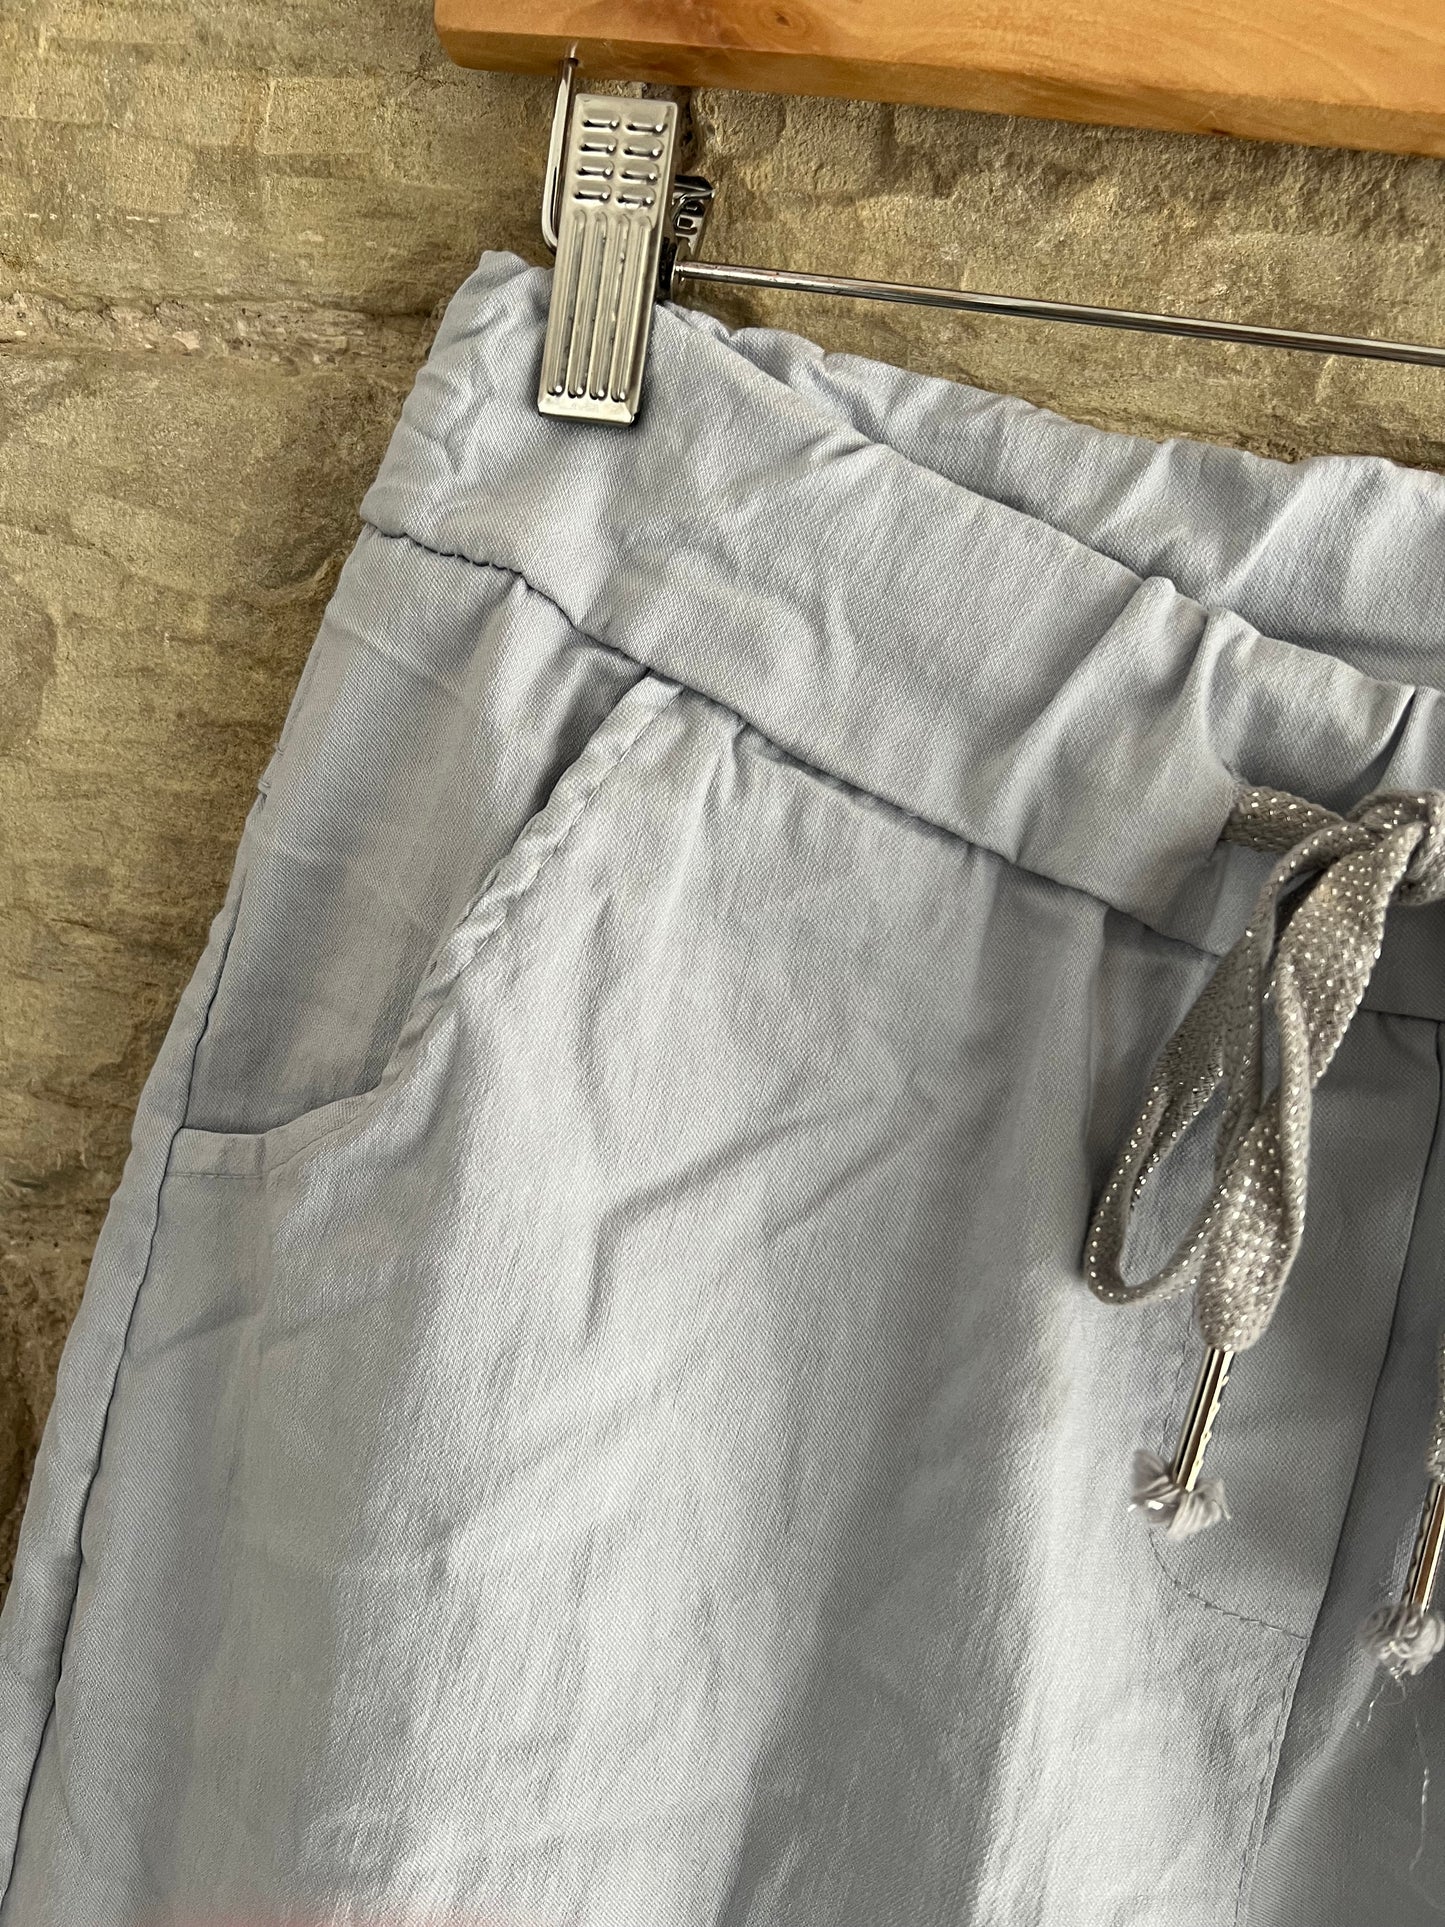 MAGIC TROUSERS - Pre Wrinkled - 2 Sizes - Silver Grey